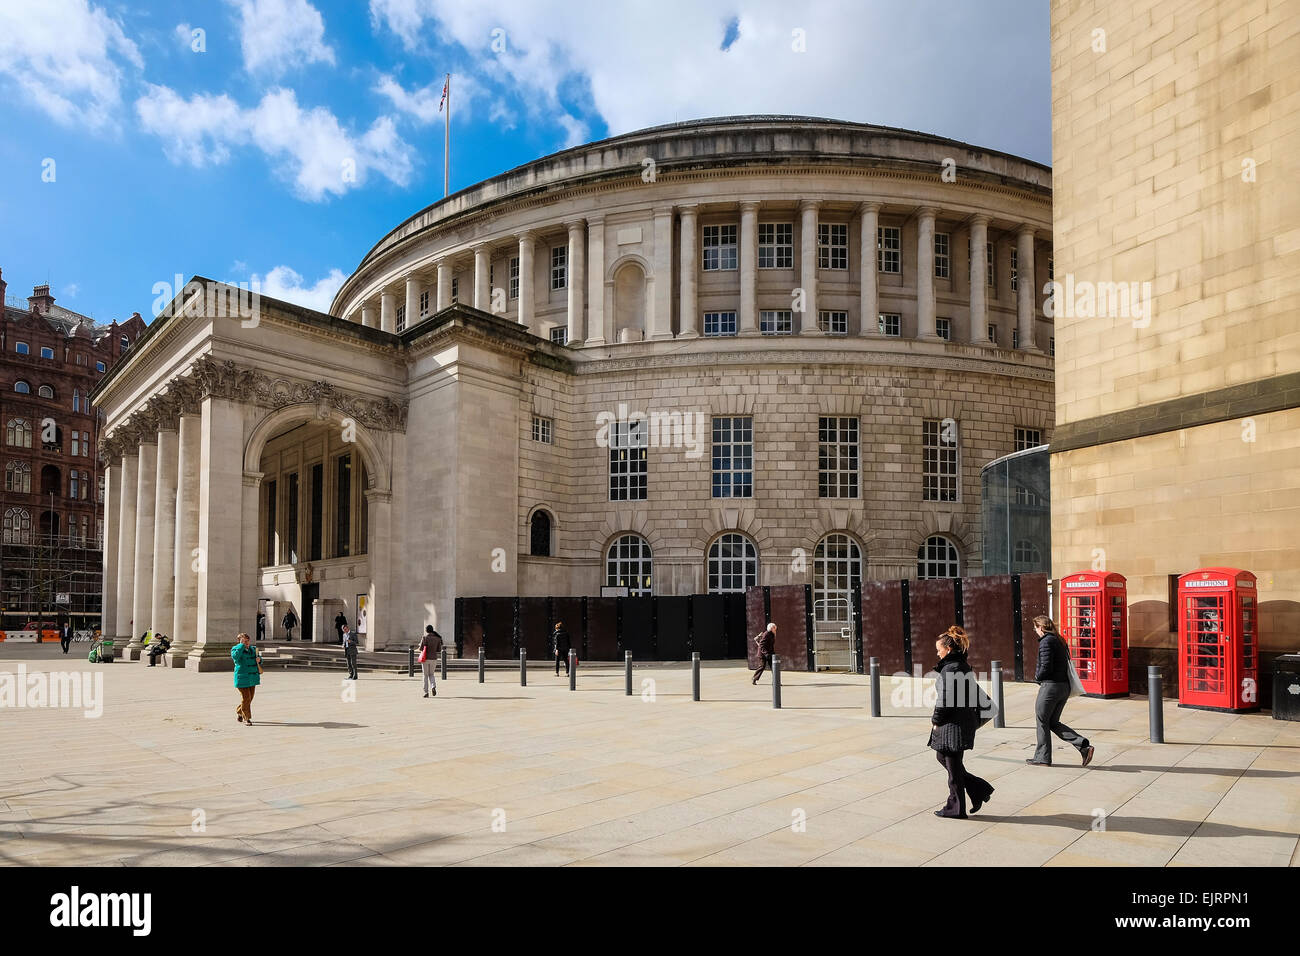 Manchester, UK: The distinctive circular library building in Manchester City Centre. Stock Photo